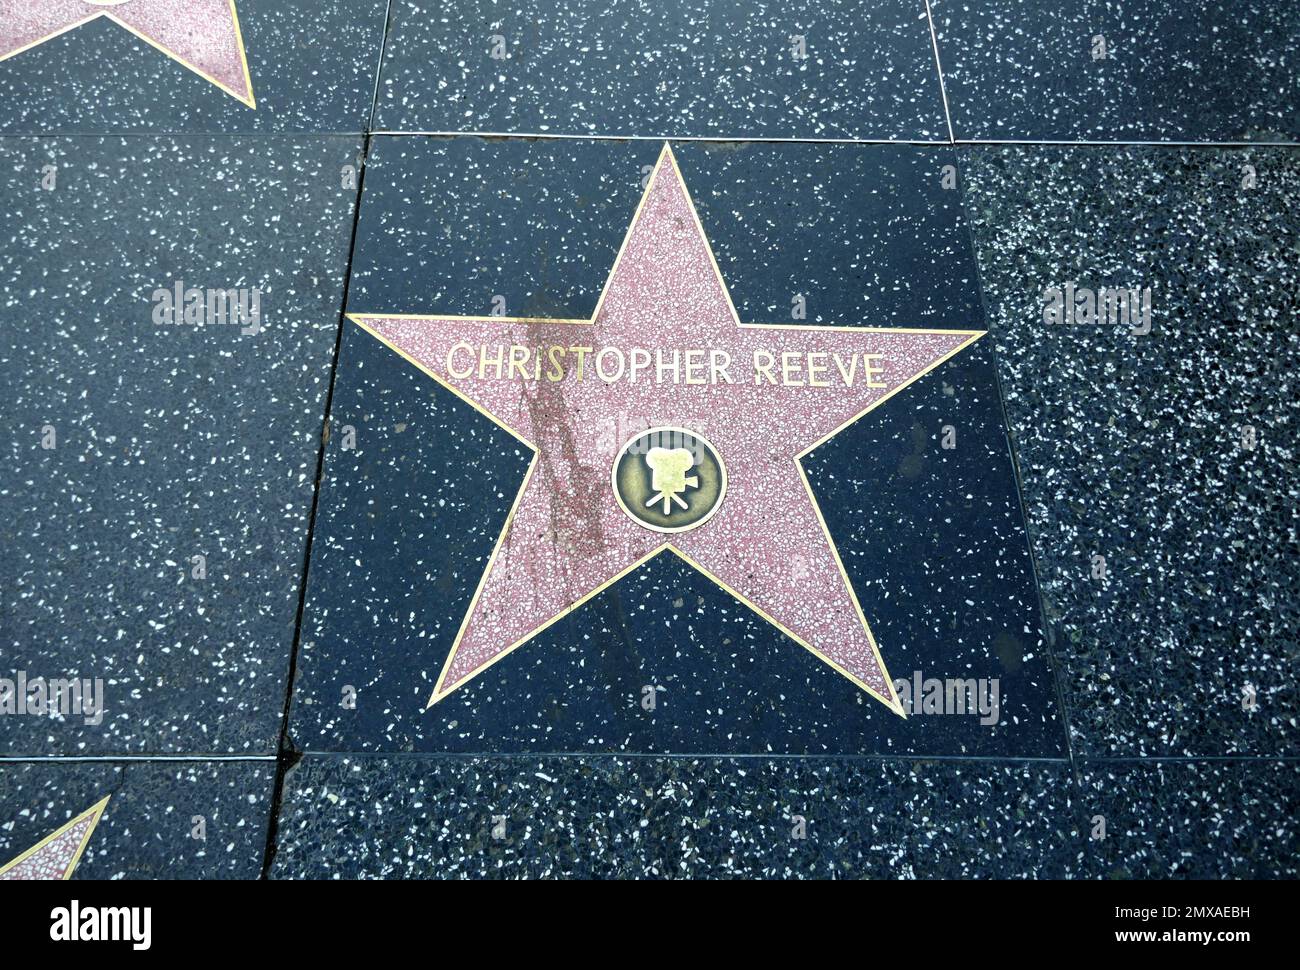 Los Angeles, California, USA 1st February 2023 A general view of atmosphere of Actor Christopher Reeve's Hollywood Walk of Fame Star on February 1, 2023 in Los Angeles, California, USA. Photo by Barry King/Alamy Stock Photo Stock Photo